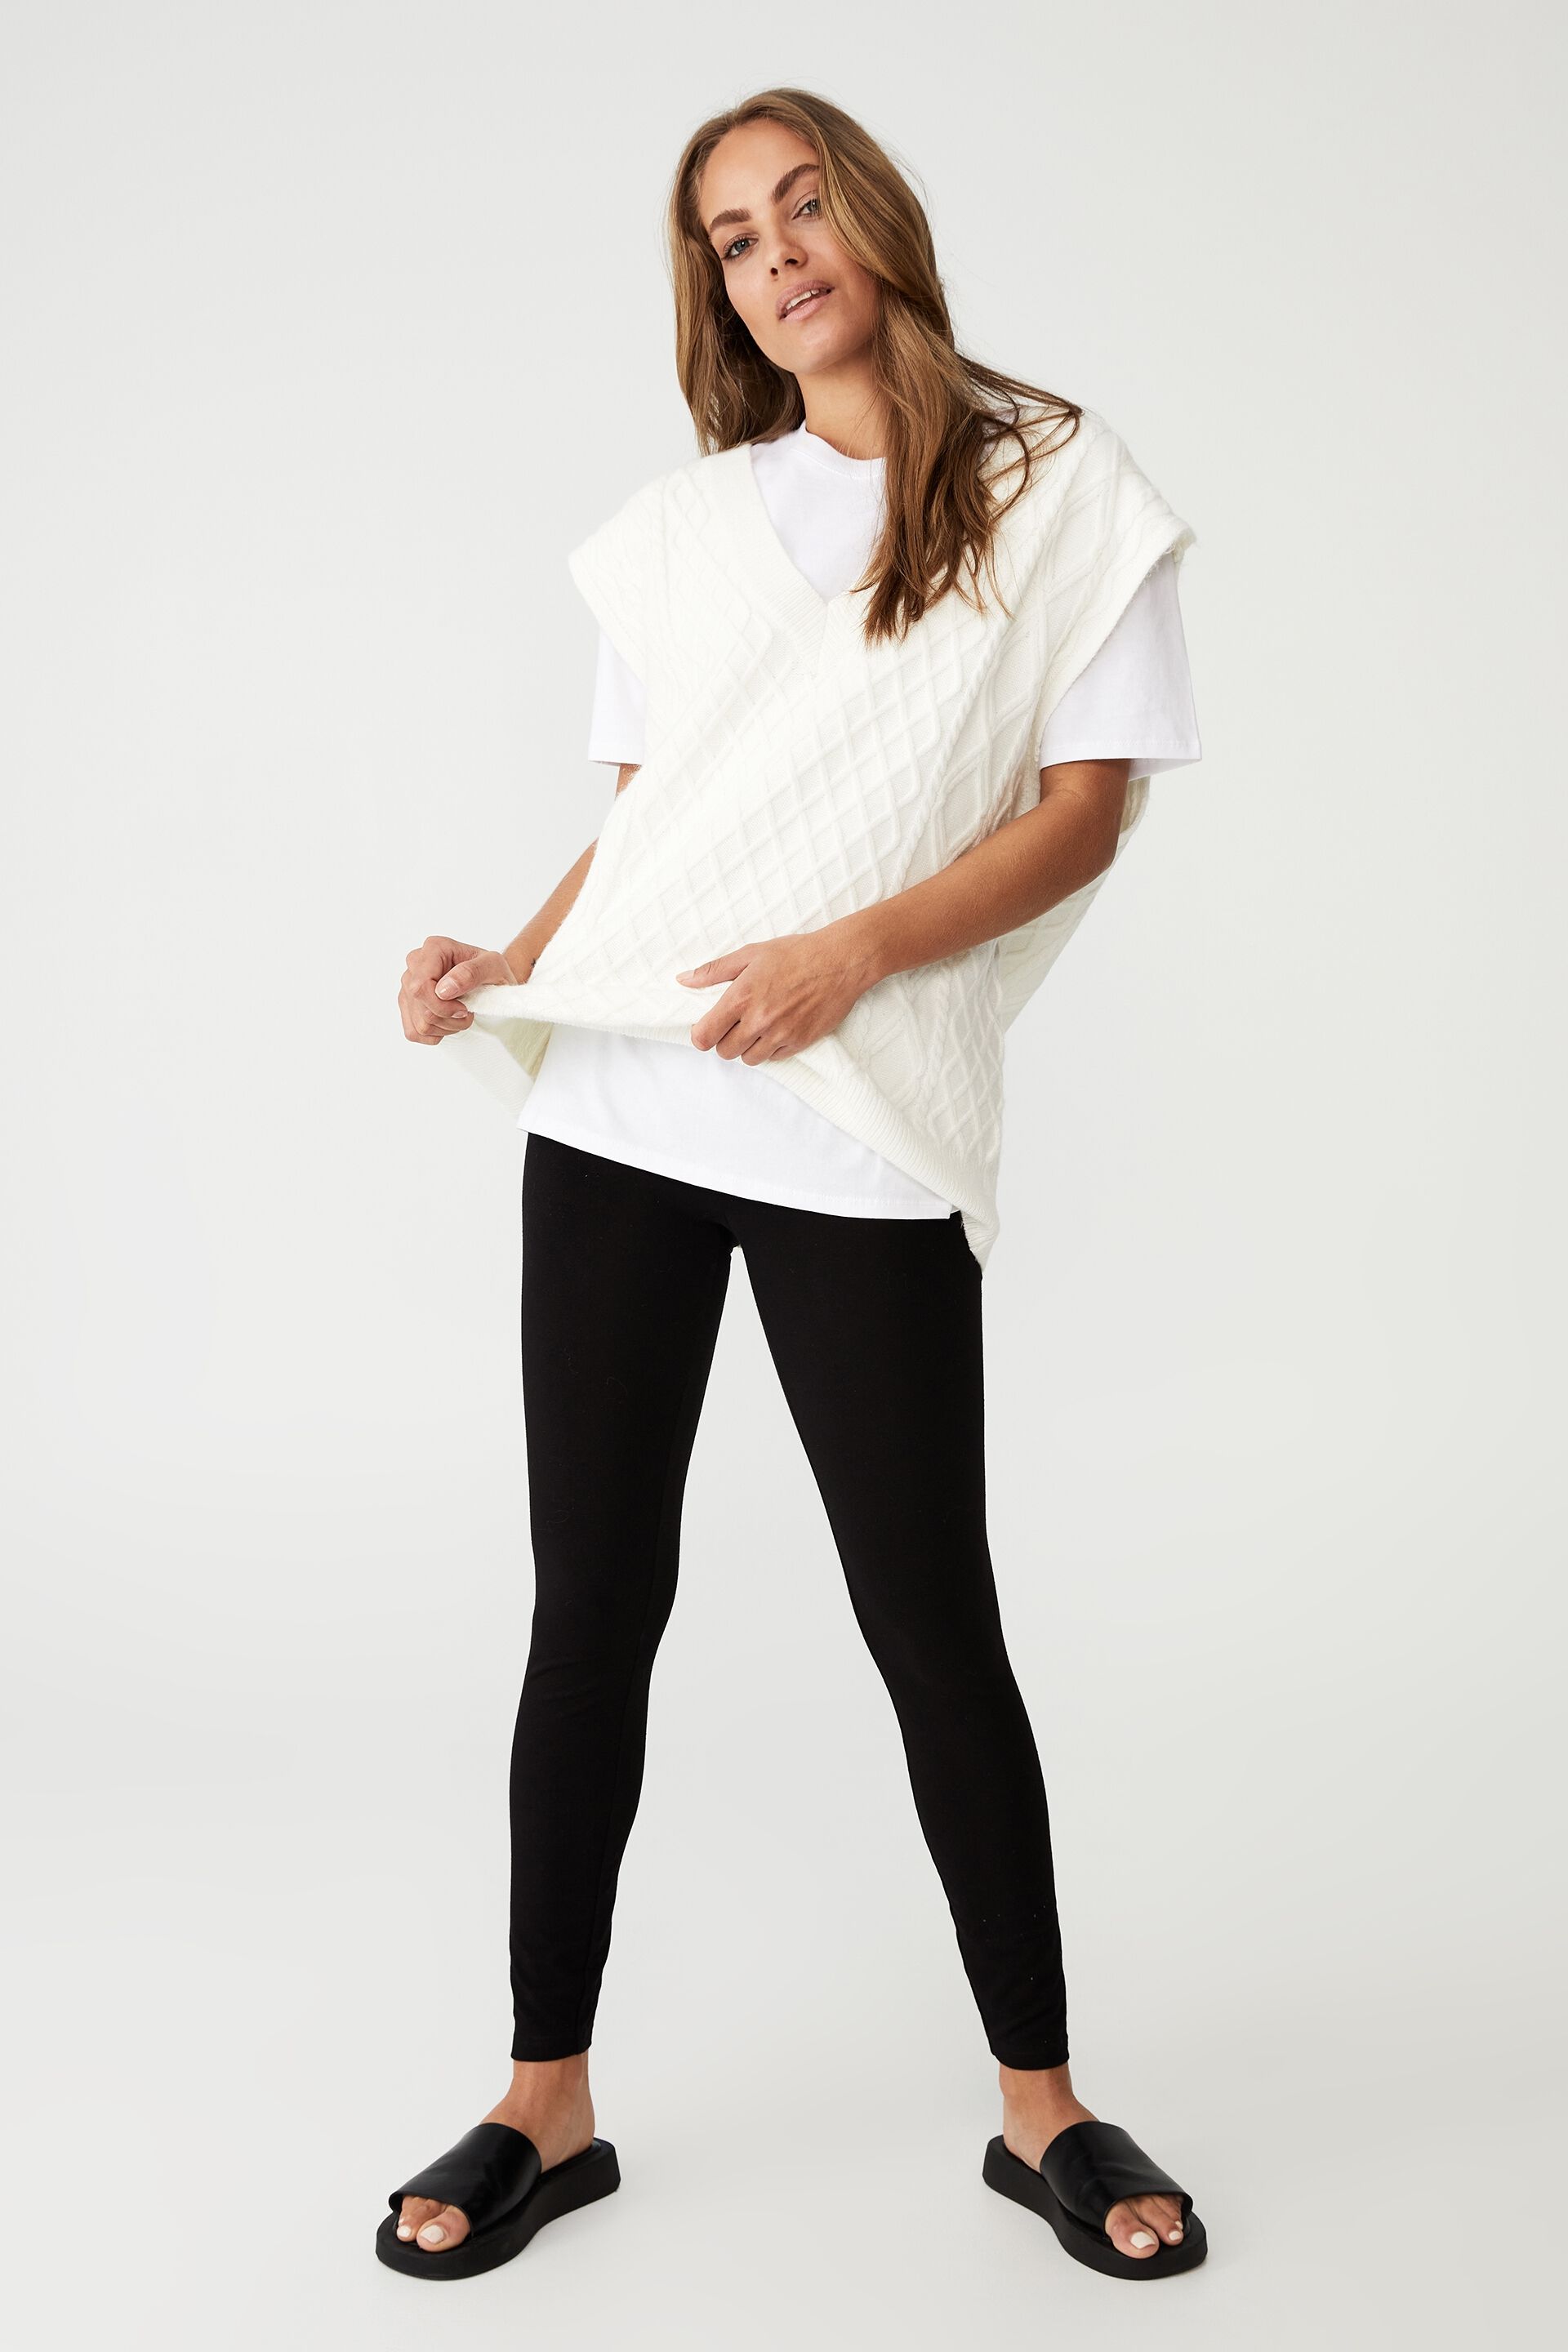 Women's NZ ACTIVE by NIC+ZOE Sustainable Fashion | Nordstrom